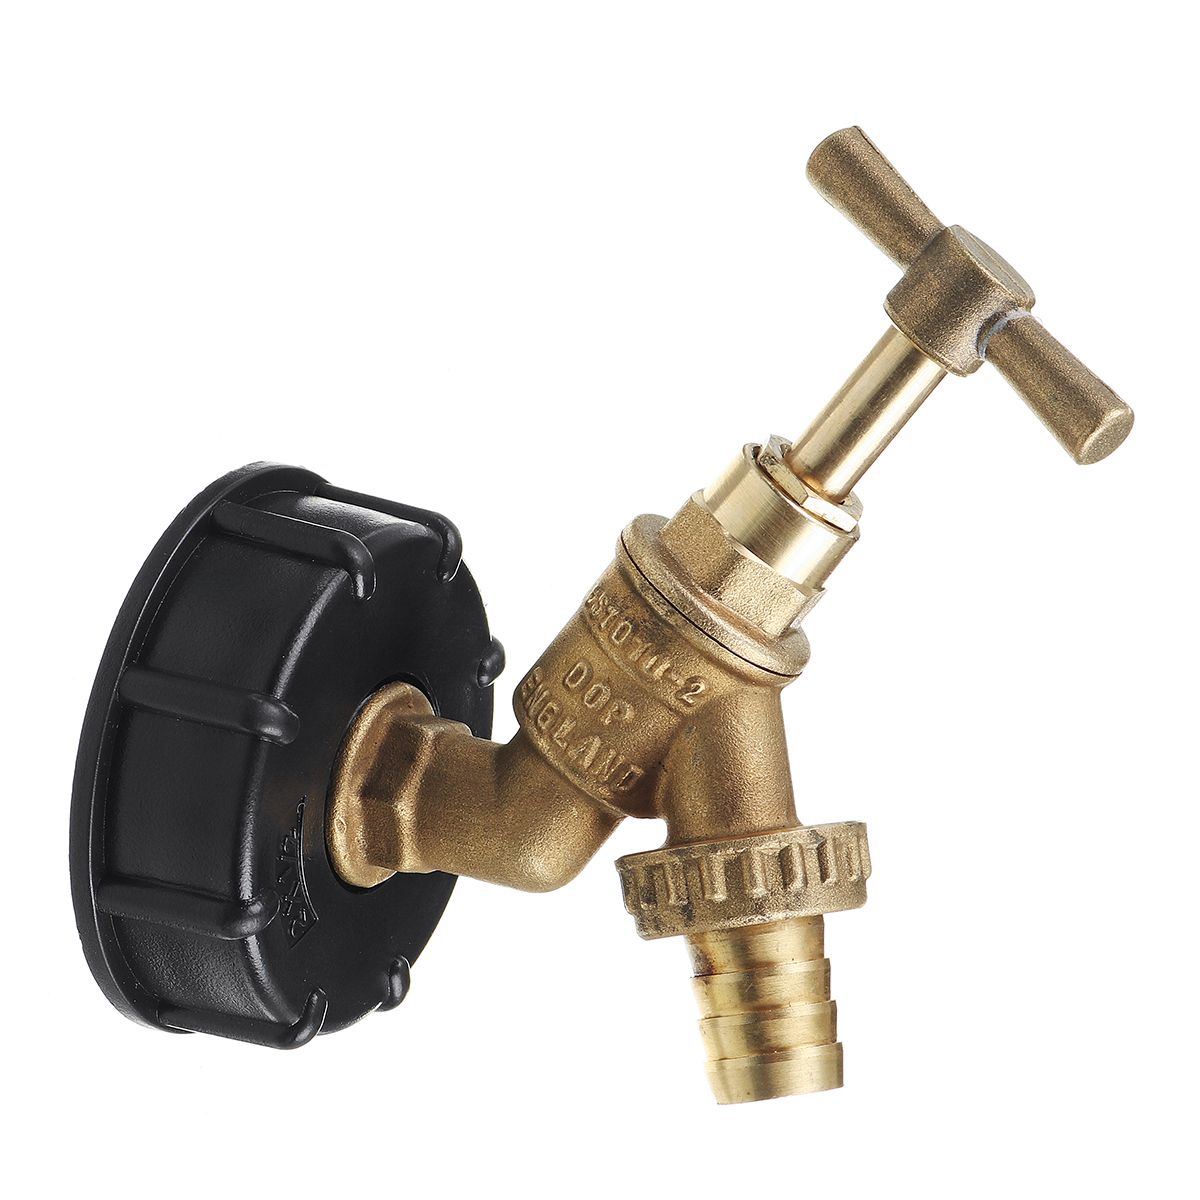 12-Inch-S60x6-IBC-Water-Tank-Adapter-Tap-Outlet-Replacement-Valve-Fitting-for-Garden-Water-Connector-1667230